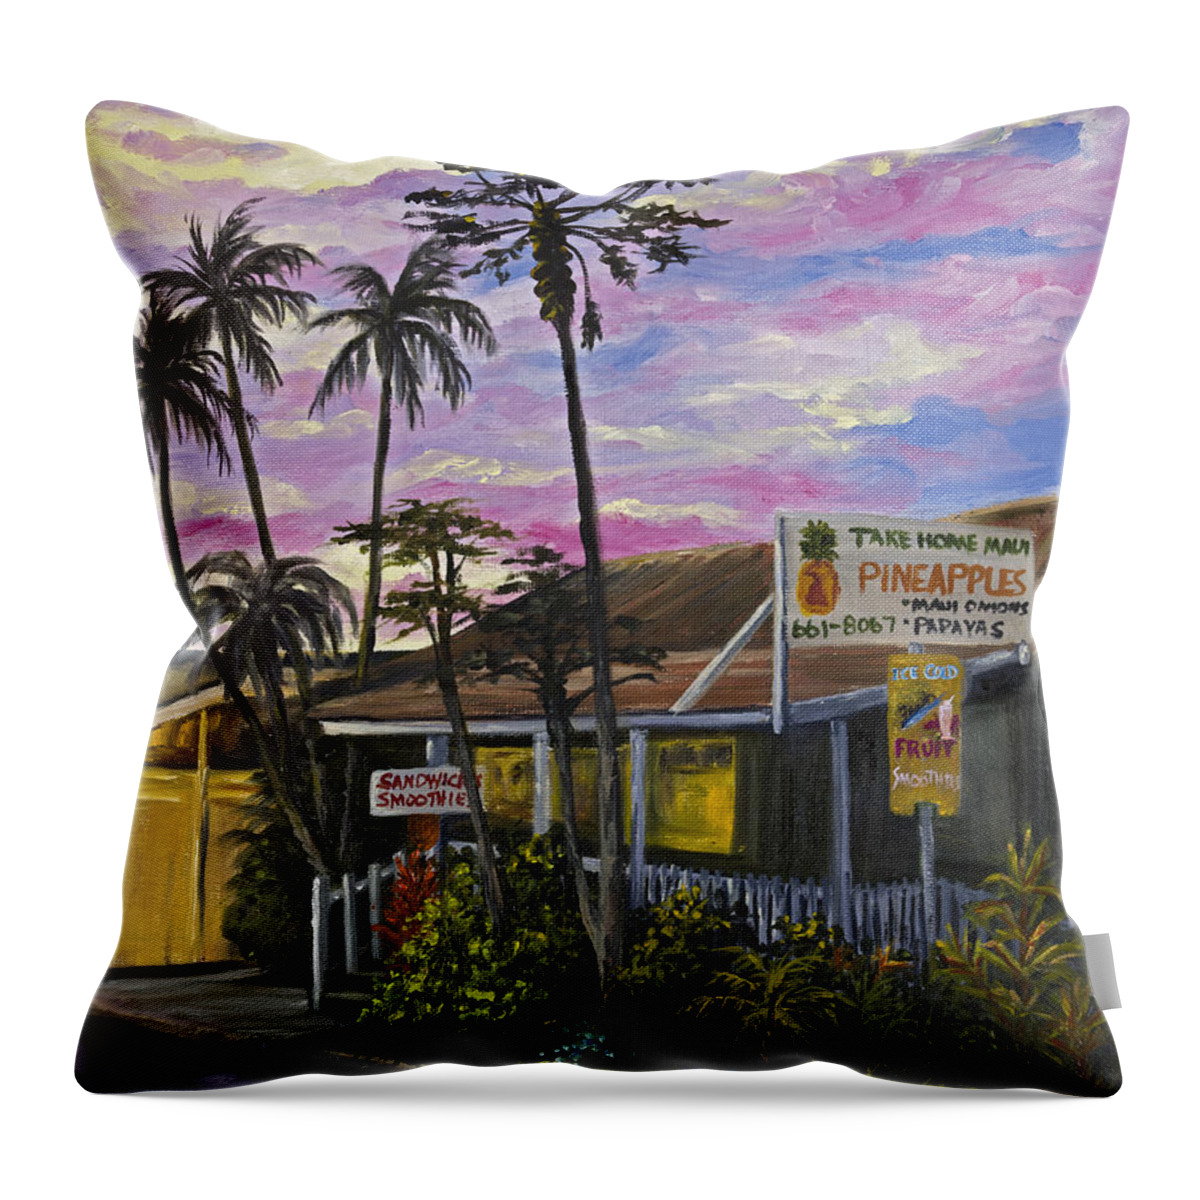 Landscape Throw Pillow featuring the painting Take Home Maui by Darice Machel McGuire